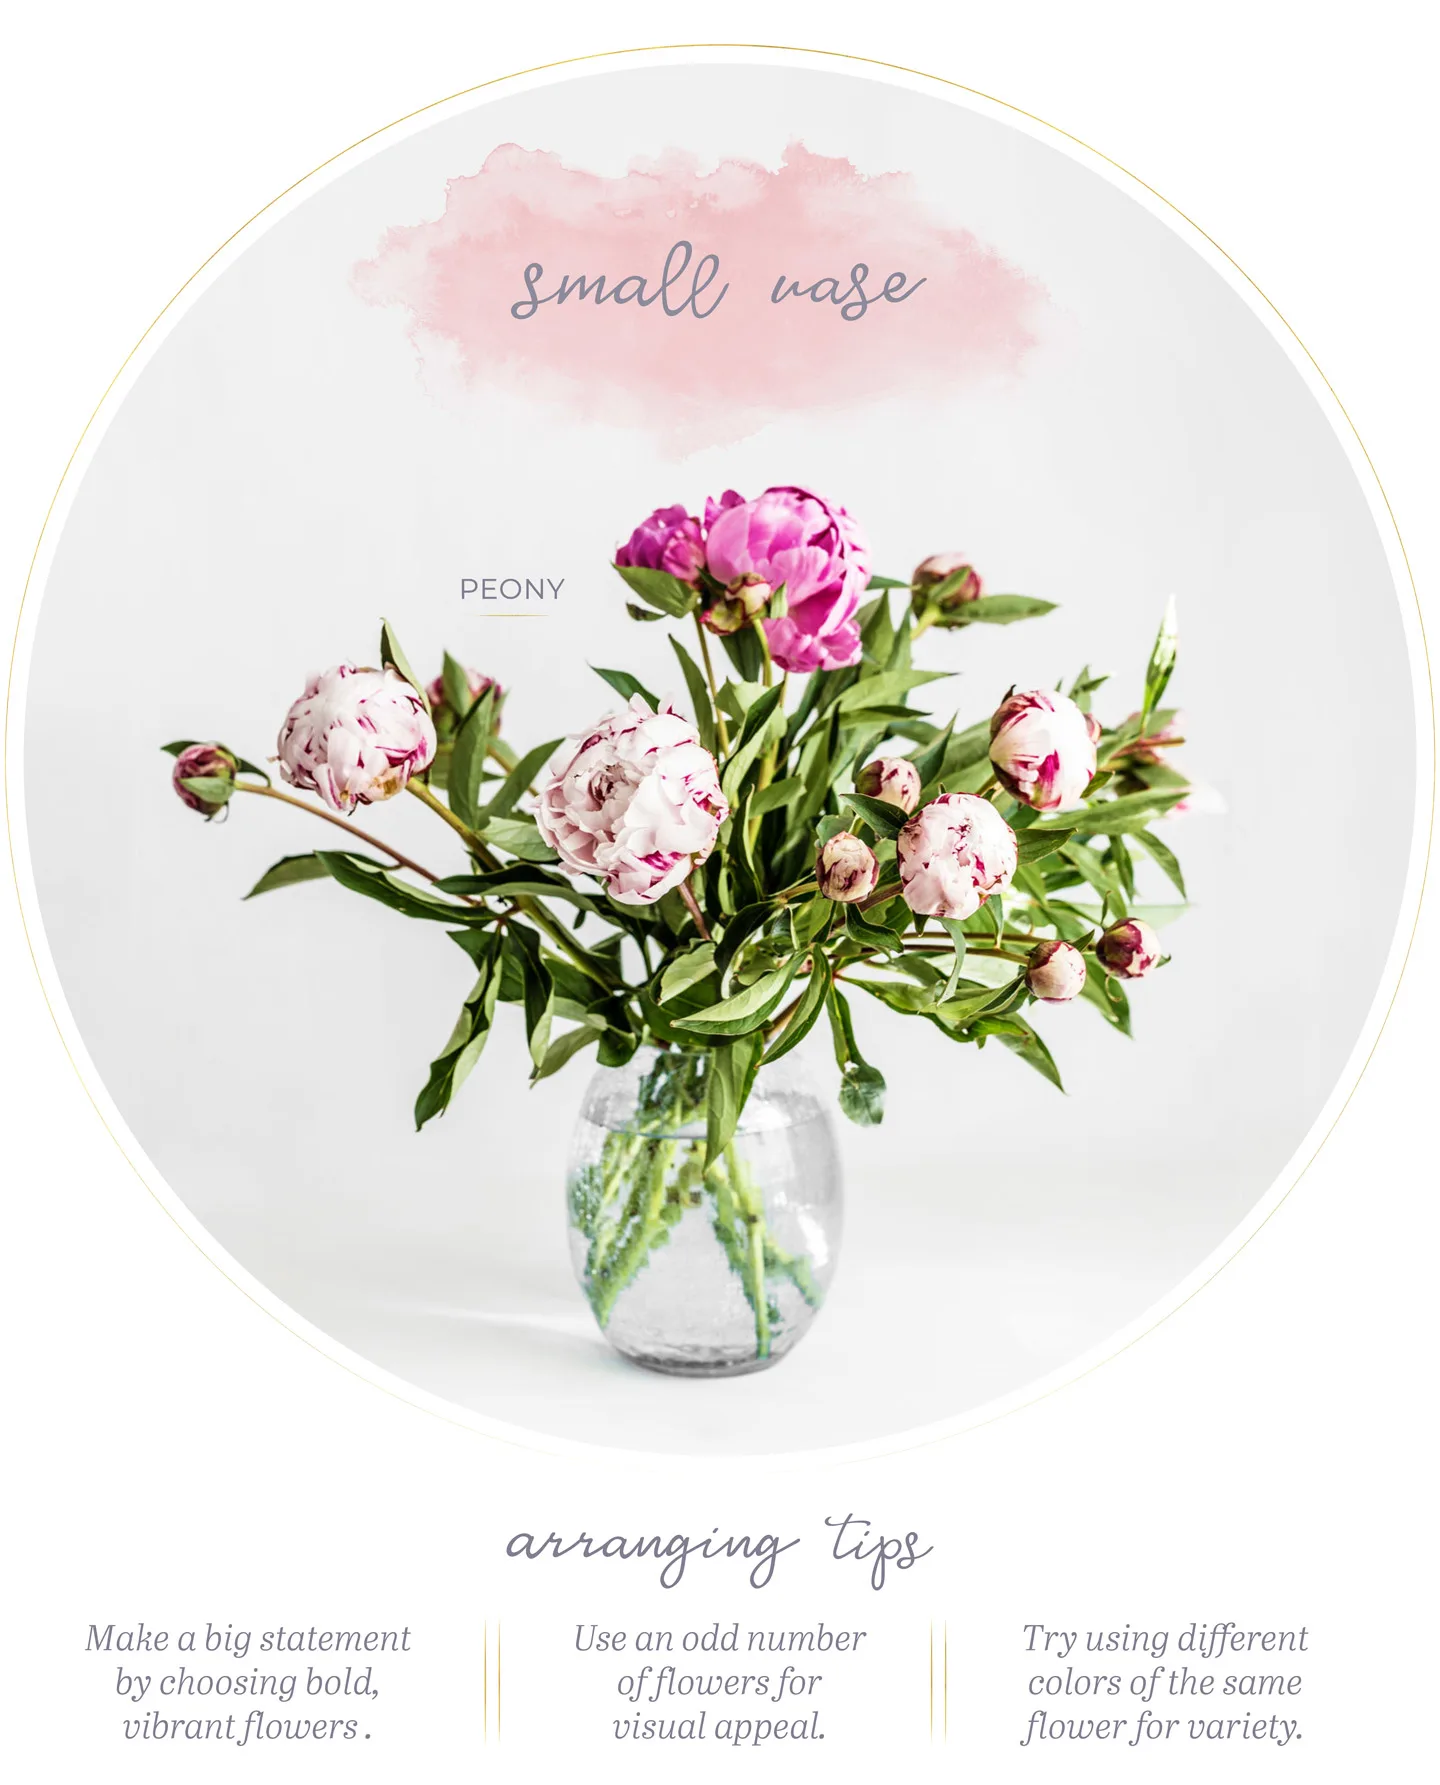 How to Arrange Flowers in a Small Vase